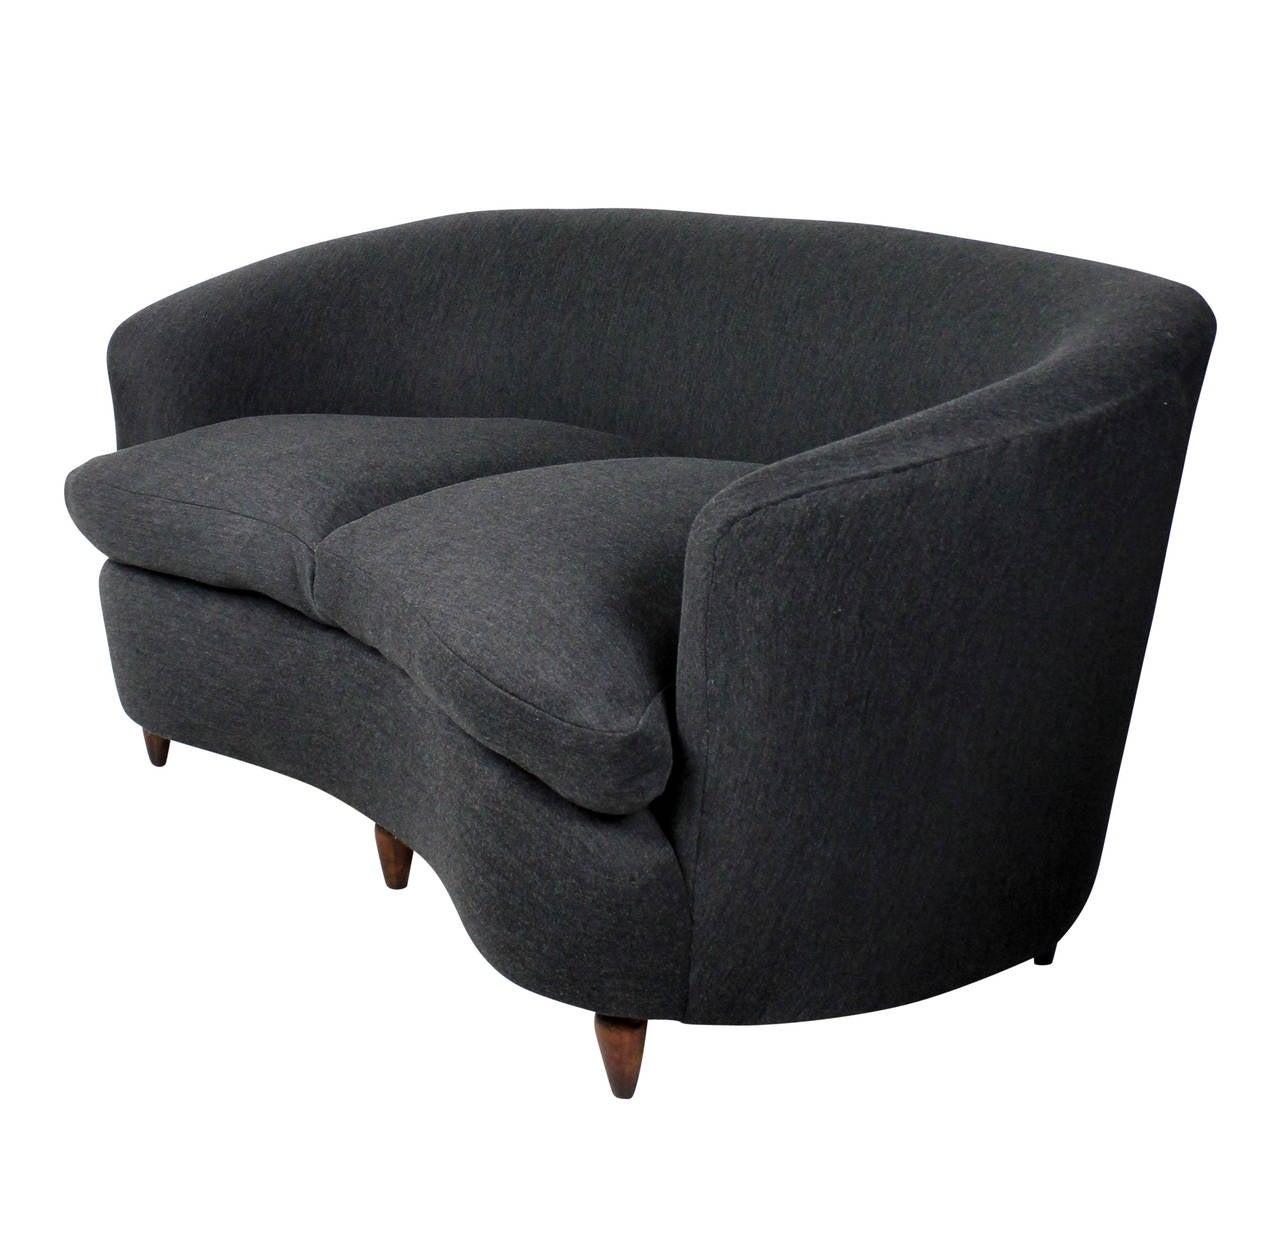 Curved Two-Seat Sofa by Parisi